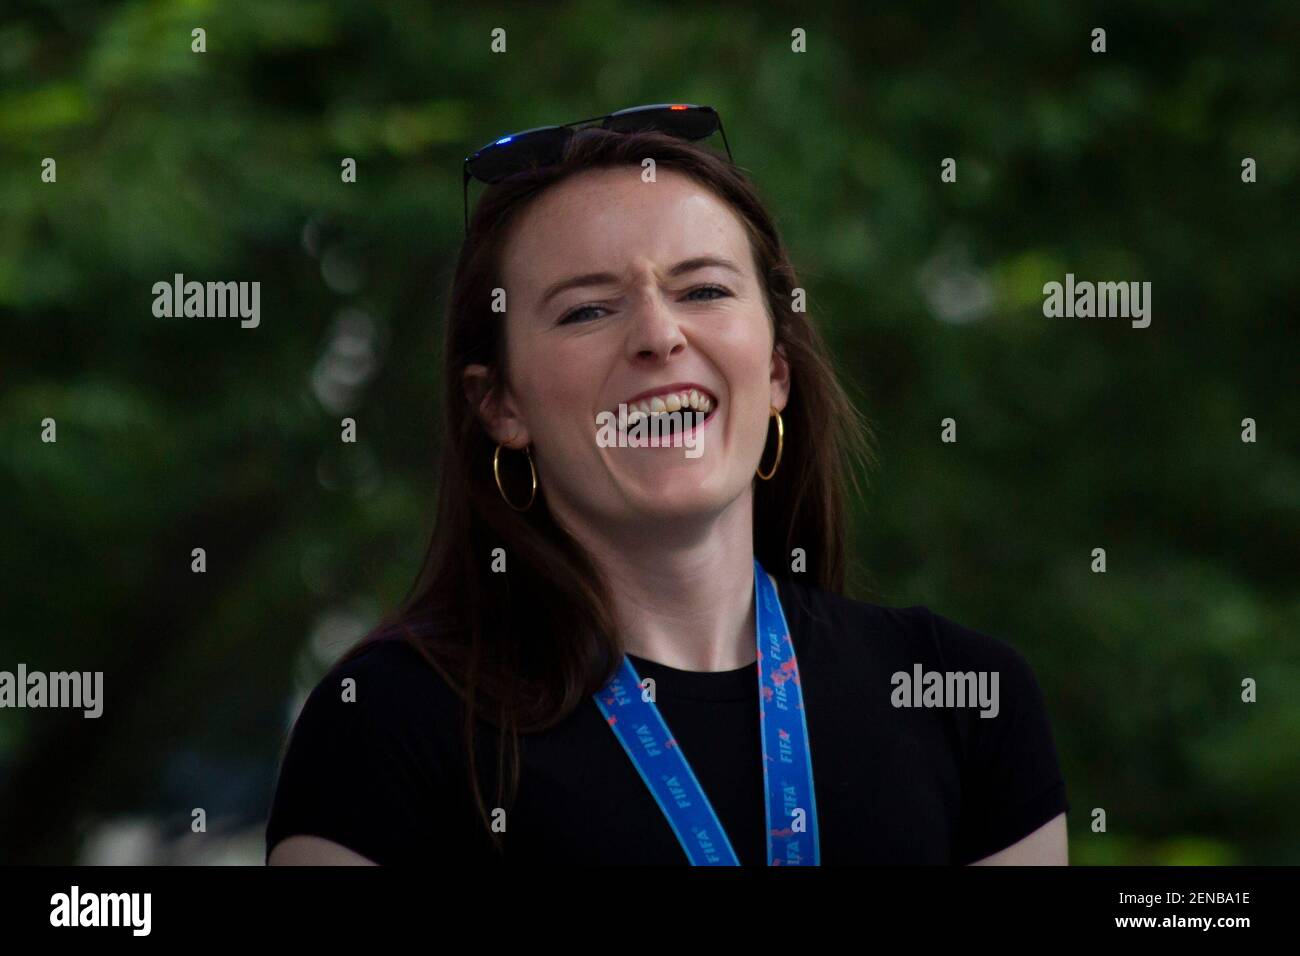 Rose Lavelle laughs on stage during her visit to Fountain Square in Cincinnati, Ohio on Friday, July 19, 2019. Roselavelle Fs 0002 (Photo by Madeleine Hordinski/The Enquirer via Imagn Content Services, LLC/USA Today Network/Sipa USA) Stock Photo